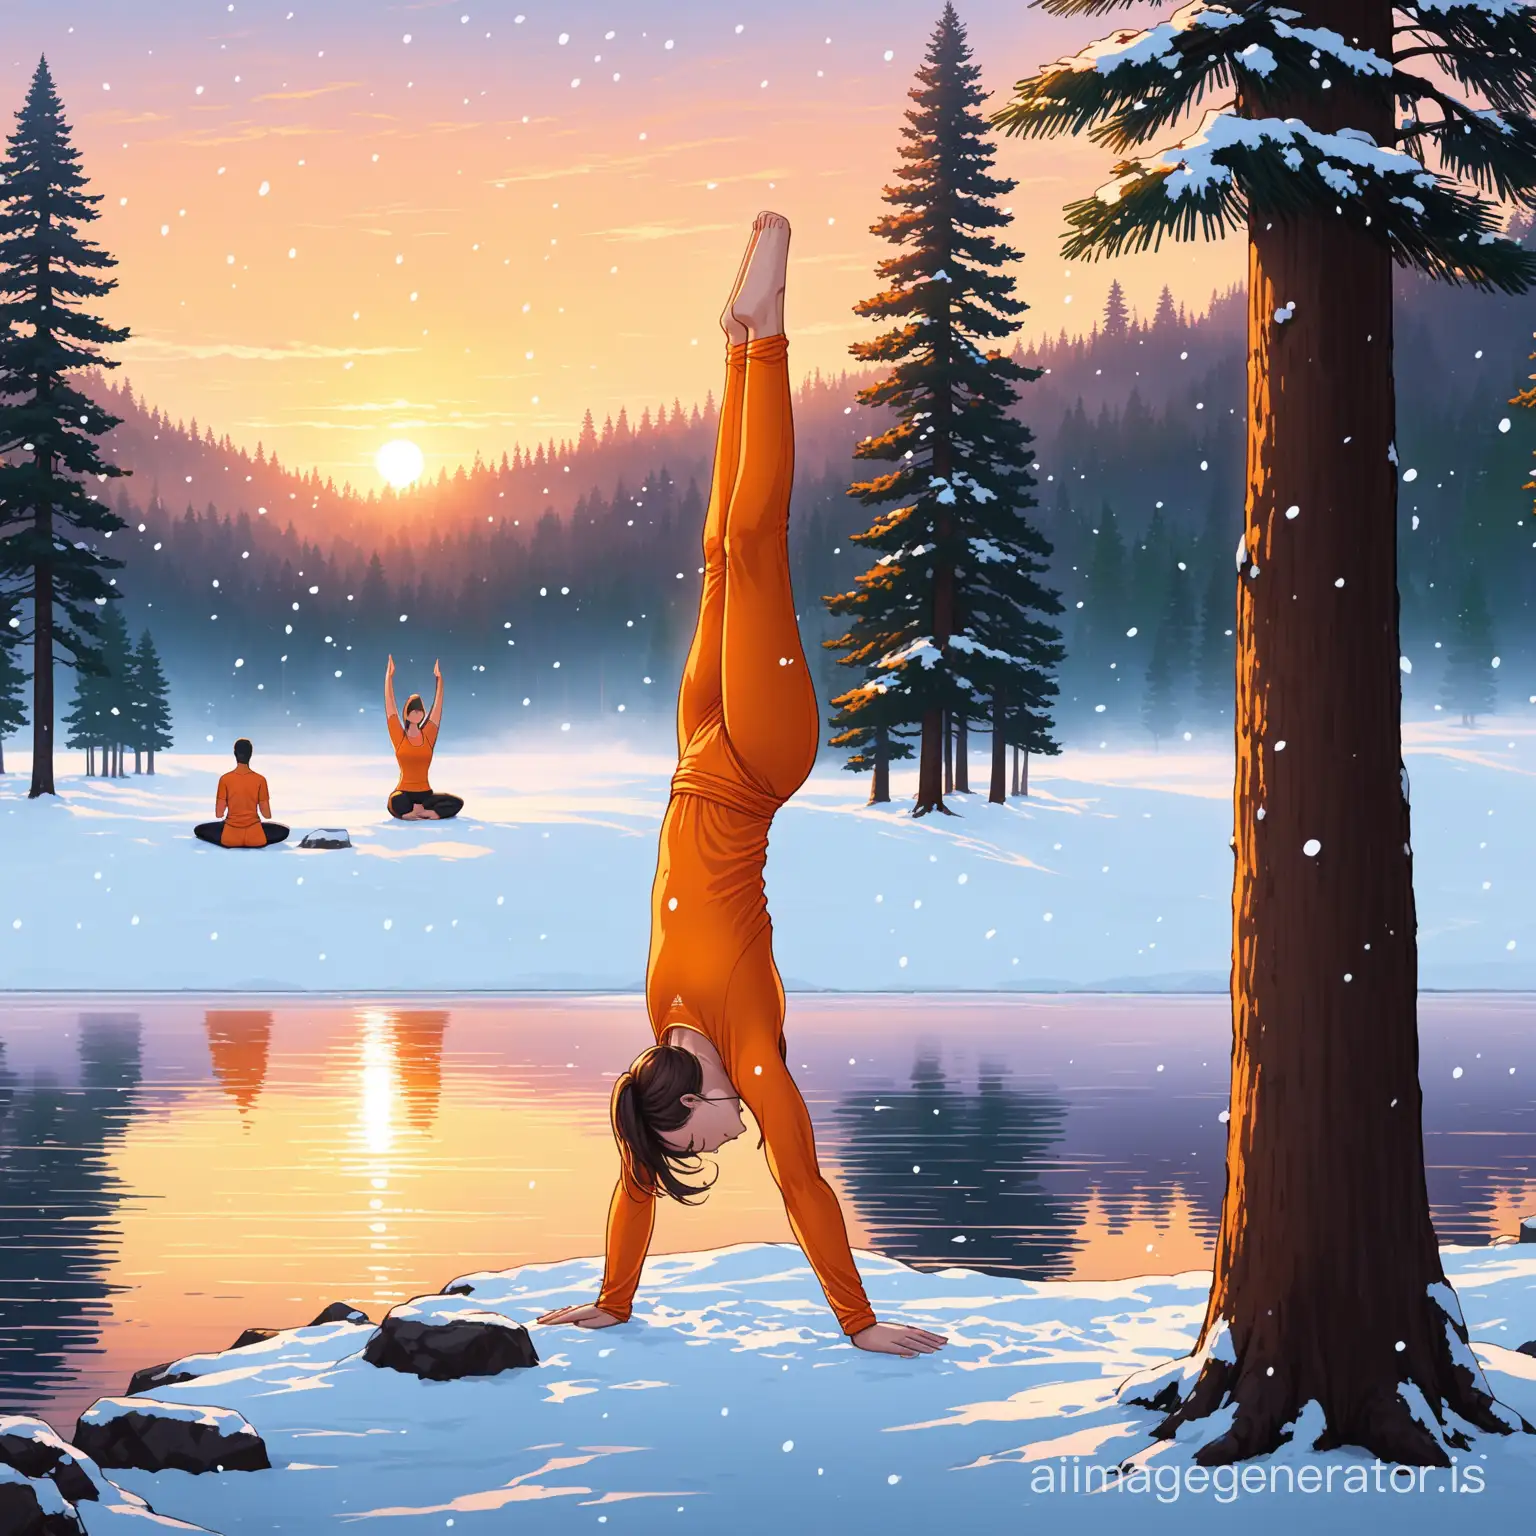 Yoga-Master-in-Orange-Attire-Doing-Headstand-by-Lakeside-Pine-Trees-Amidst-Snowfall-at-Dawn